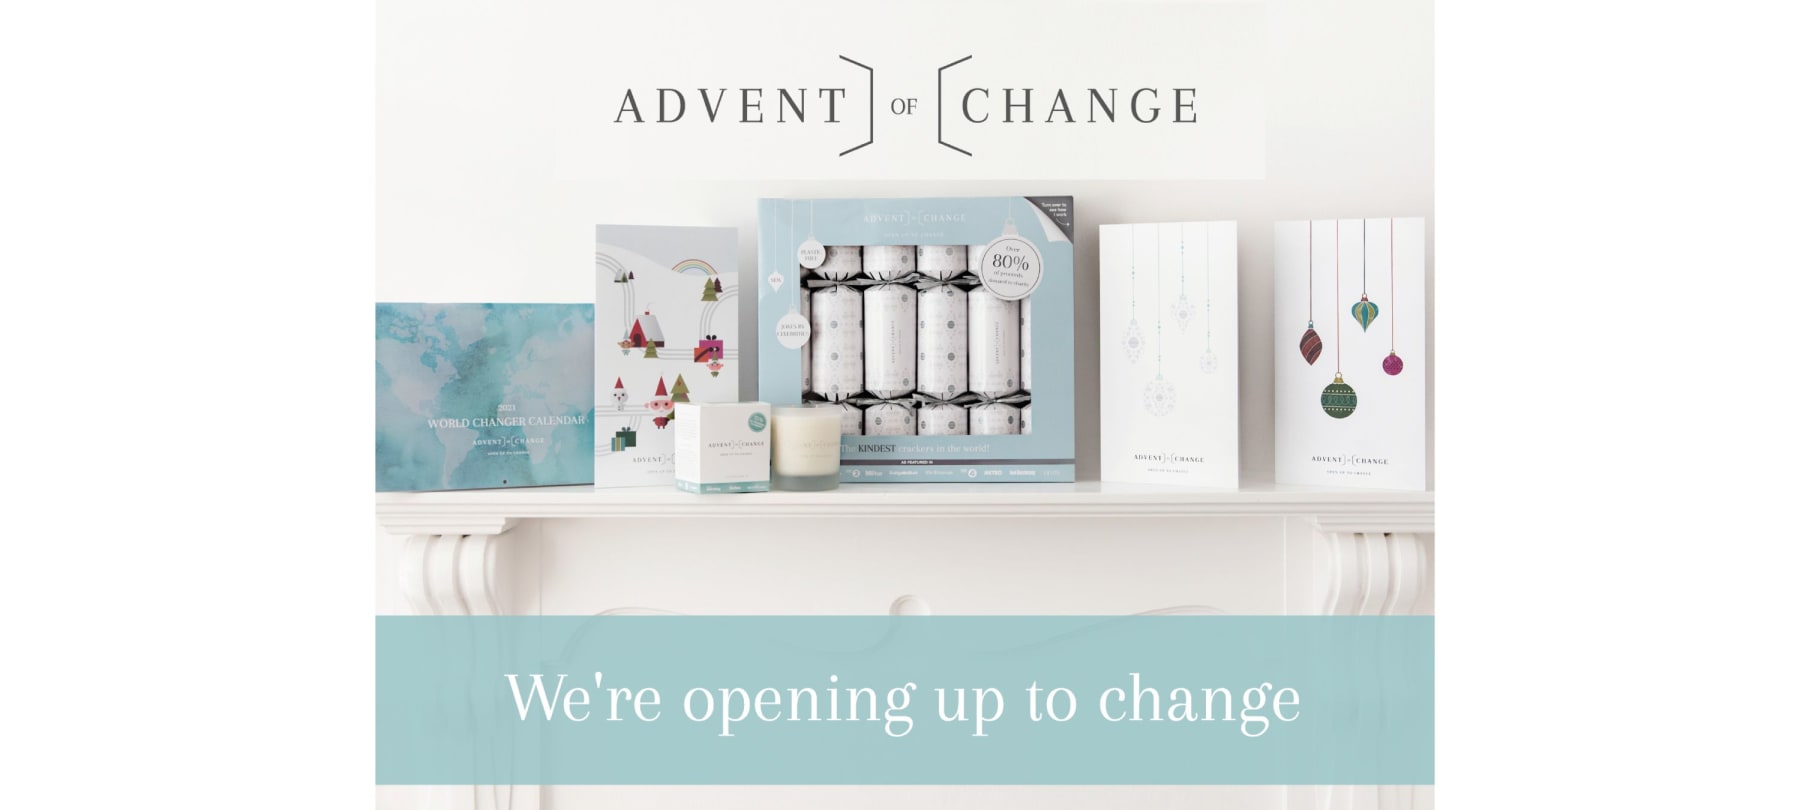 Over &#163;6,000 raised by Advent of Change – the Christmas giving revolution